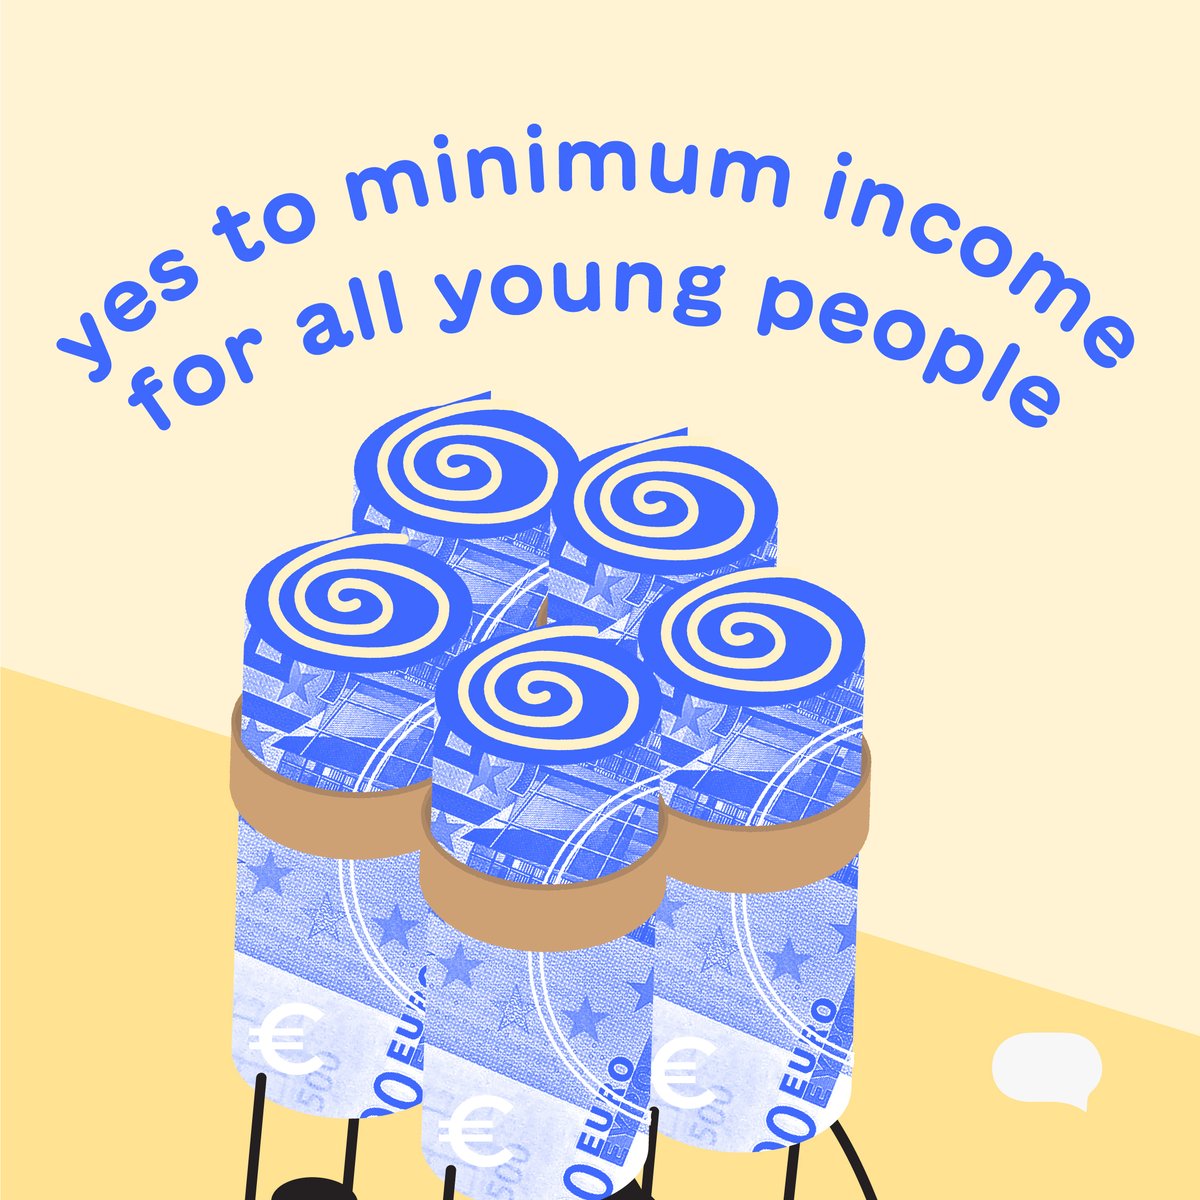 Today’s @Europarl_EN vote on #MinimumIncome is a big step towards real improvements in living conditions across the EU 💶

What's next? We want to see the push for an EU directive ensuring minimum #income for everyone, lifting young people out of poverty ✊
 
#ForYouthRights